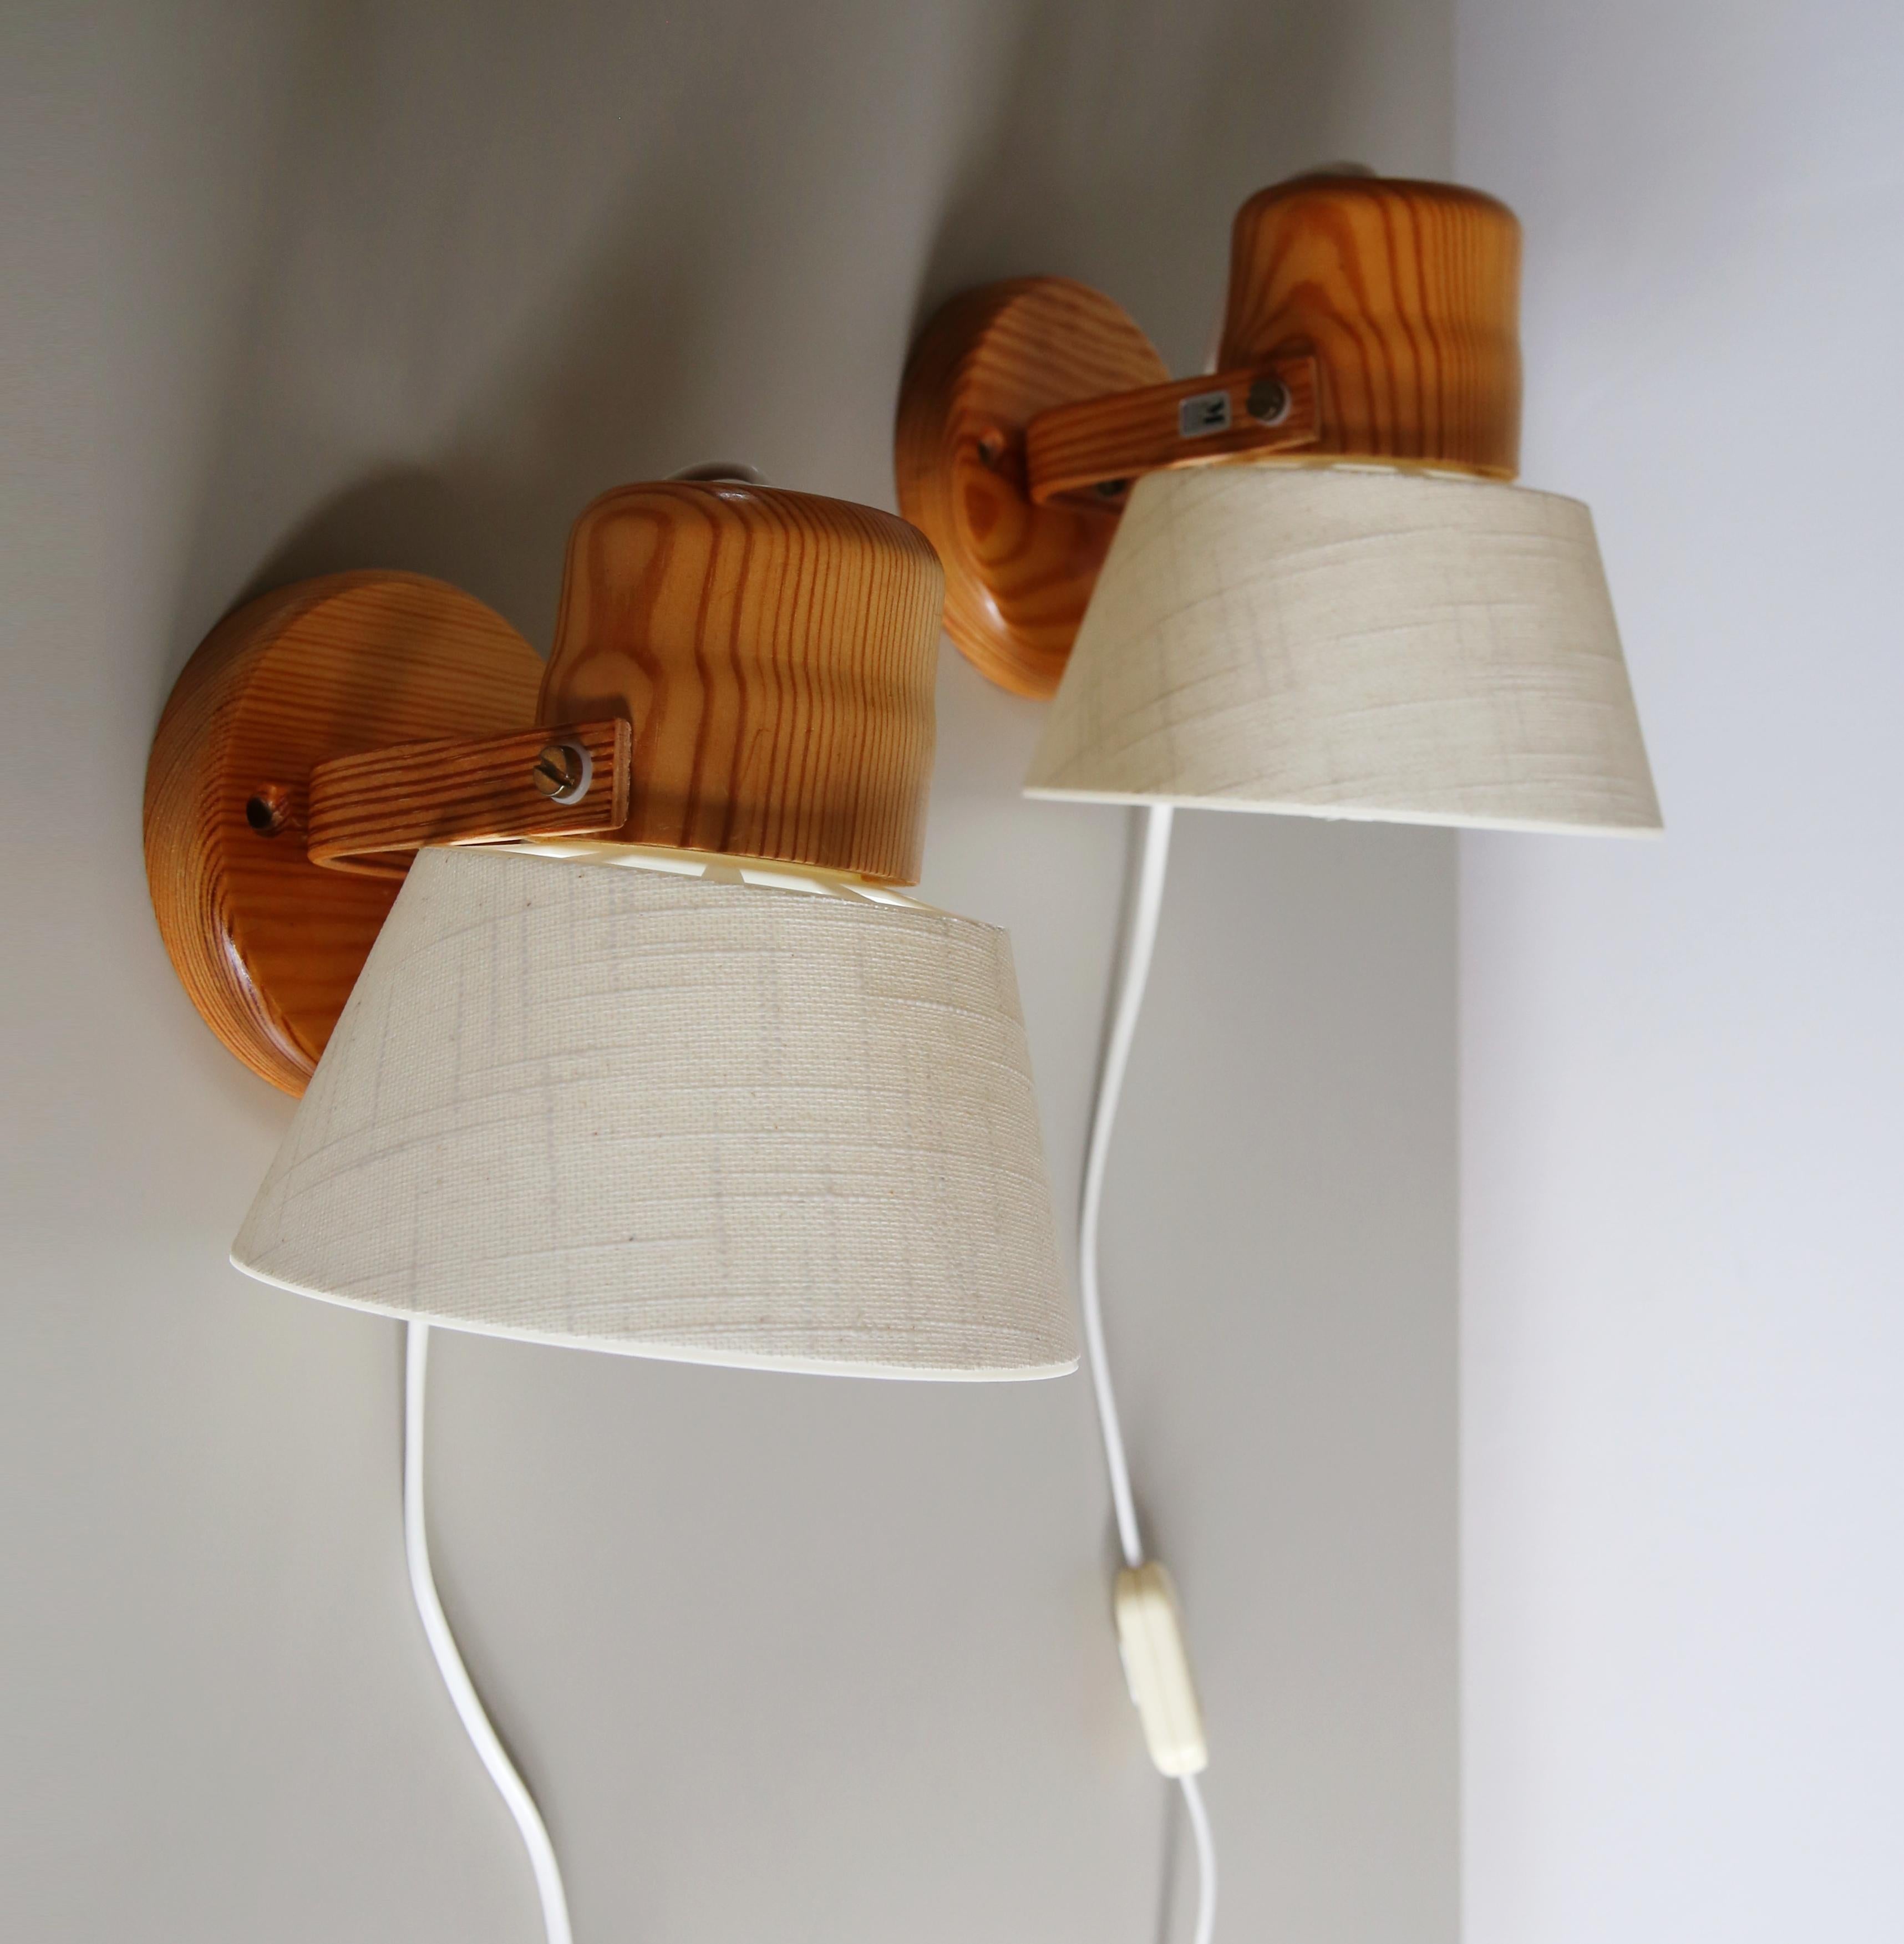 Lovely pair of 1970s Swedish pine wall lamps by Markslojd. 
With a textured cream fabric shades that have a rigid plastic inner lining, the lamp heads can be both rotated and tilted up and down.

I will send these with brass wall screws that match